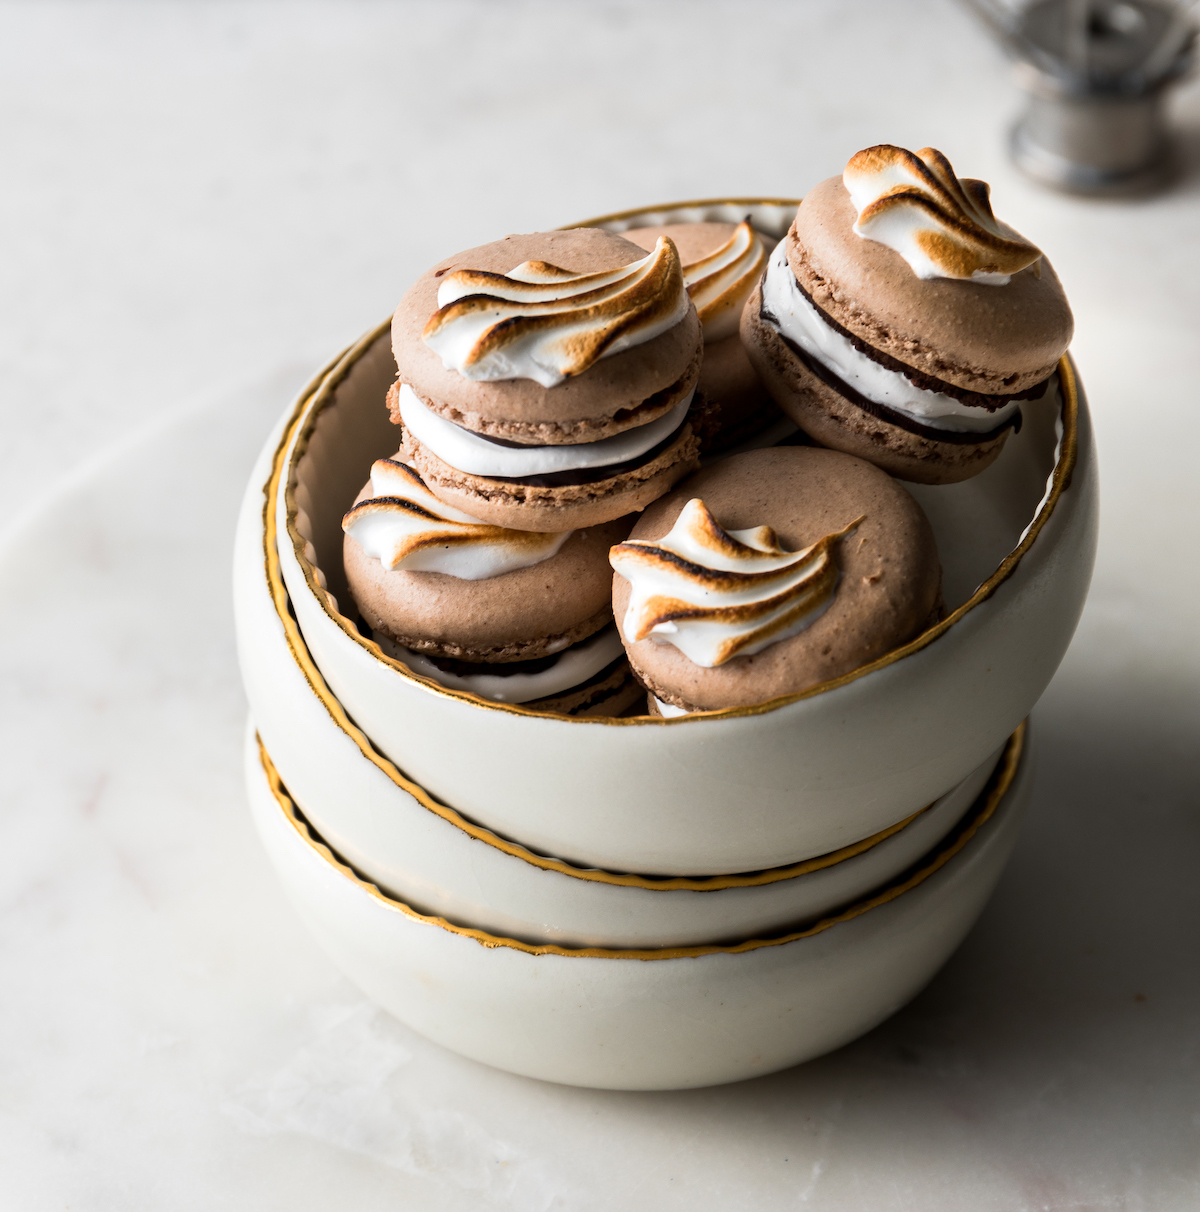 A bowl of chocolate French macarons with marshmallow filling